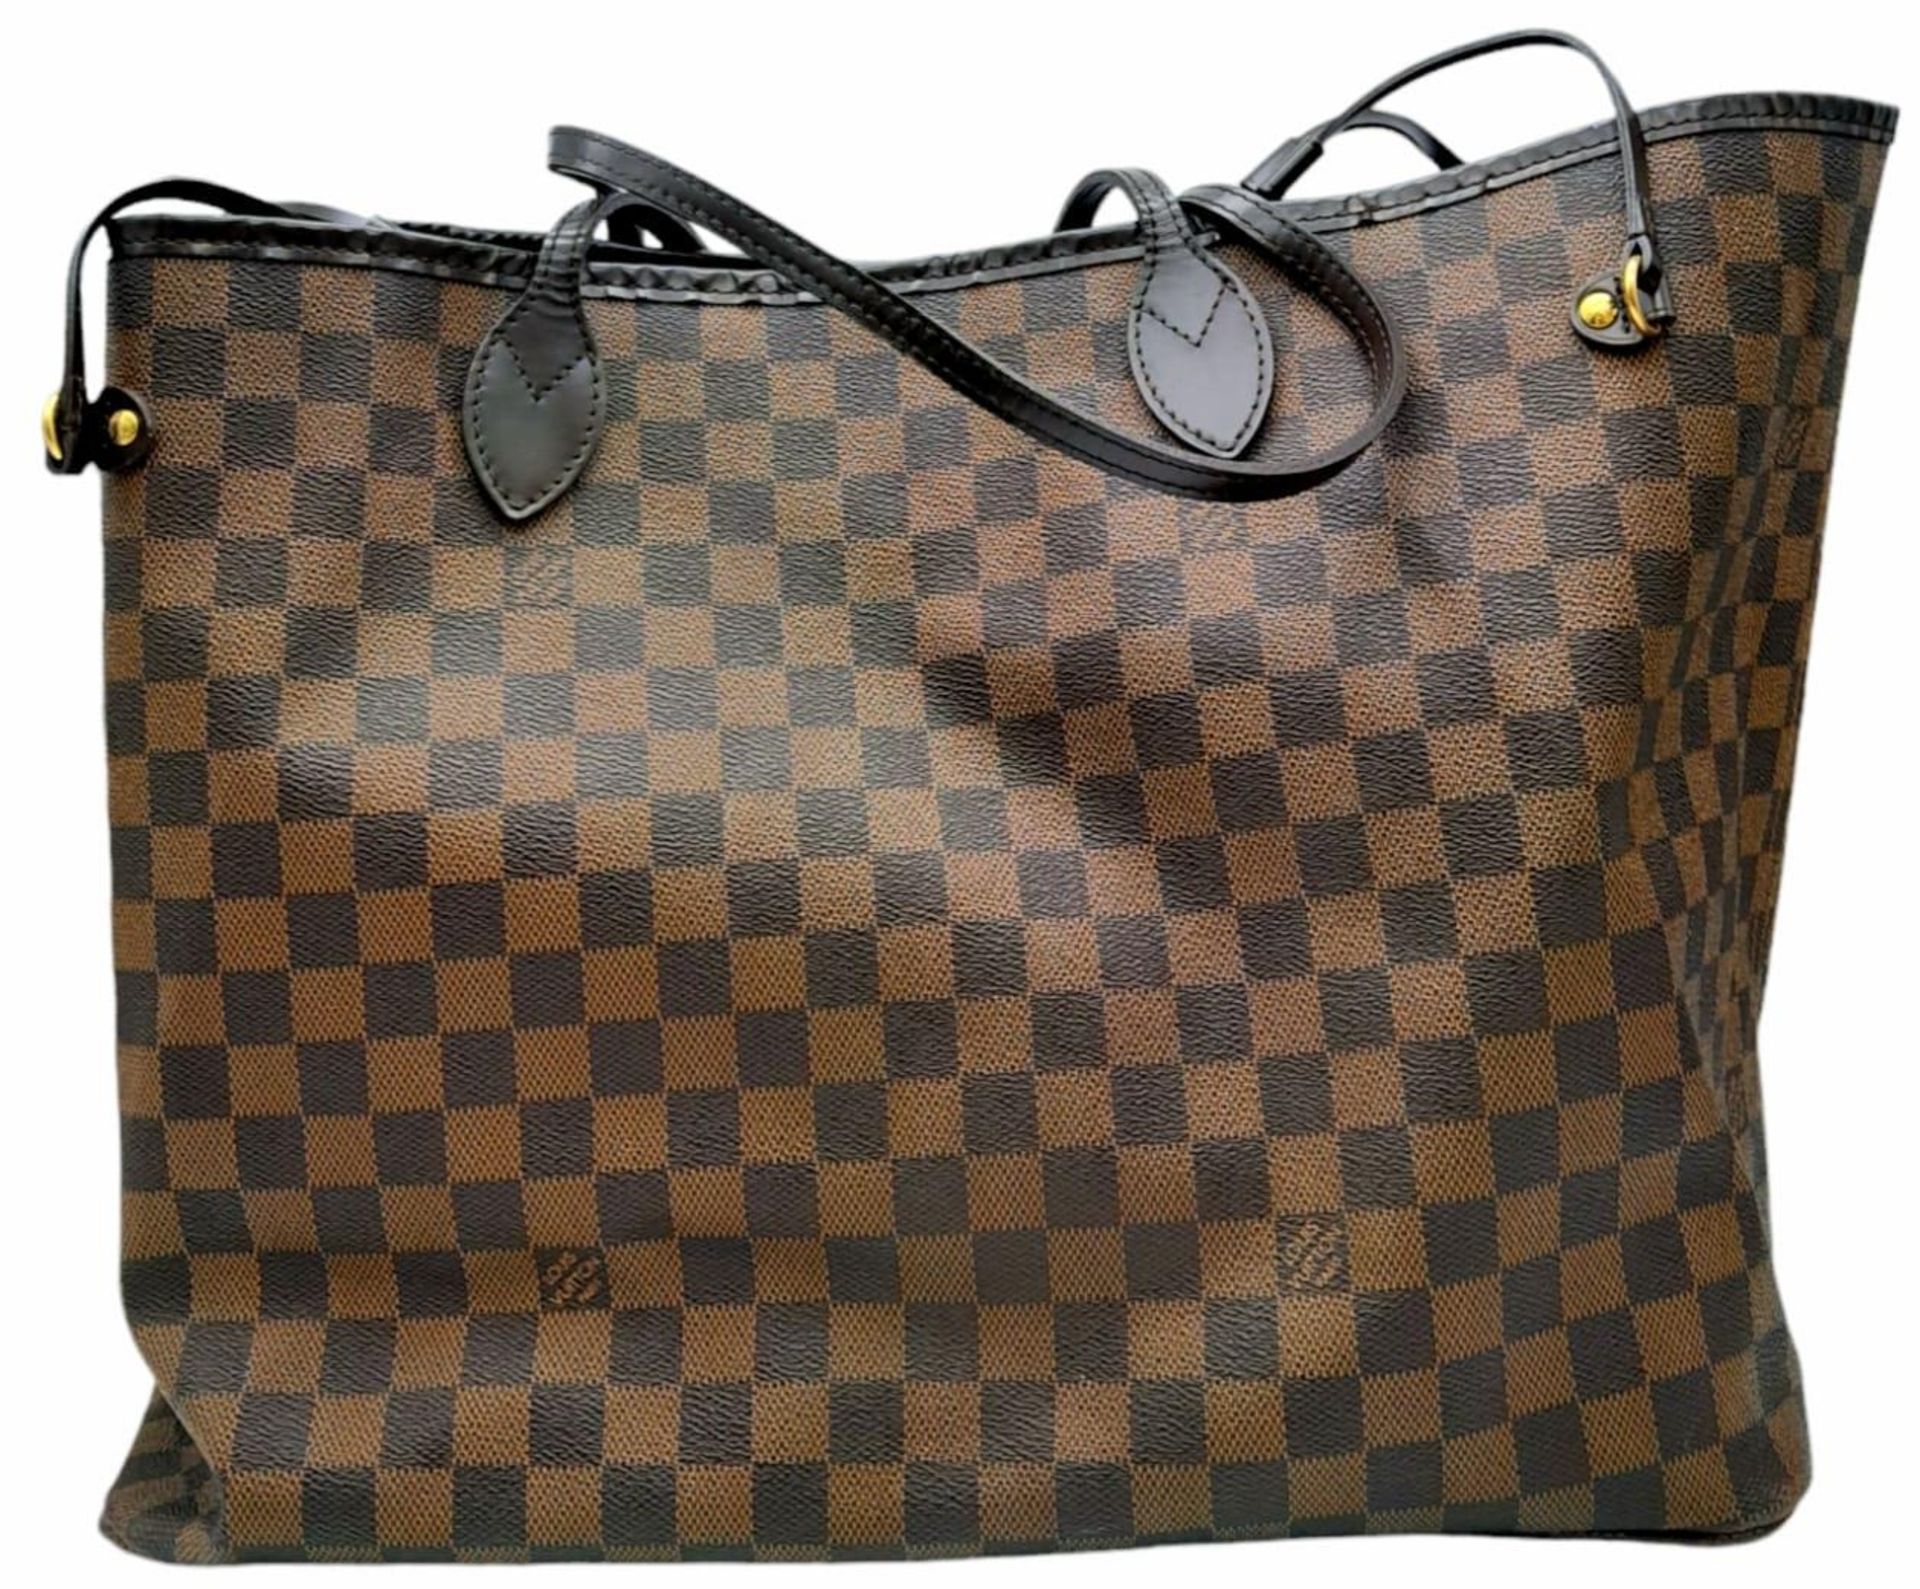 A Louis Vuitton Damier Ebene 'Neverfull GM' Bag. Leather exterior with gold-toned hardware, two thin